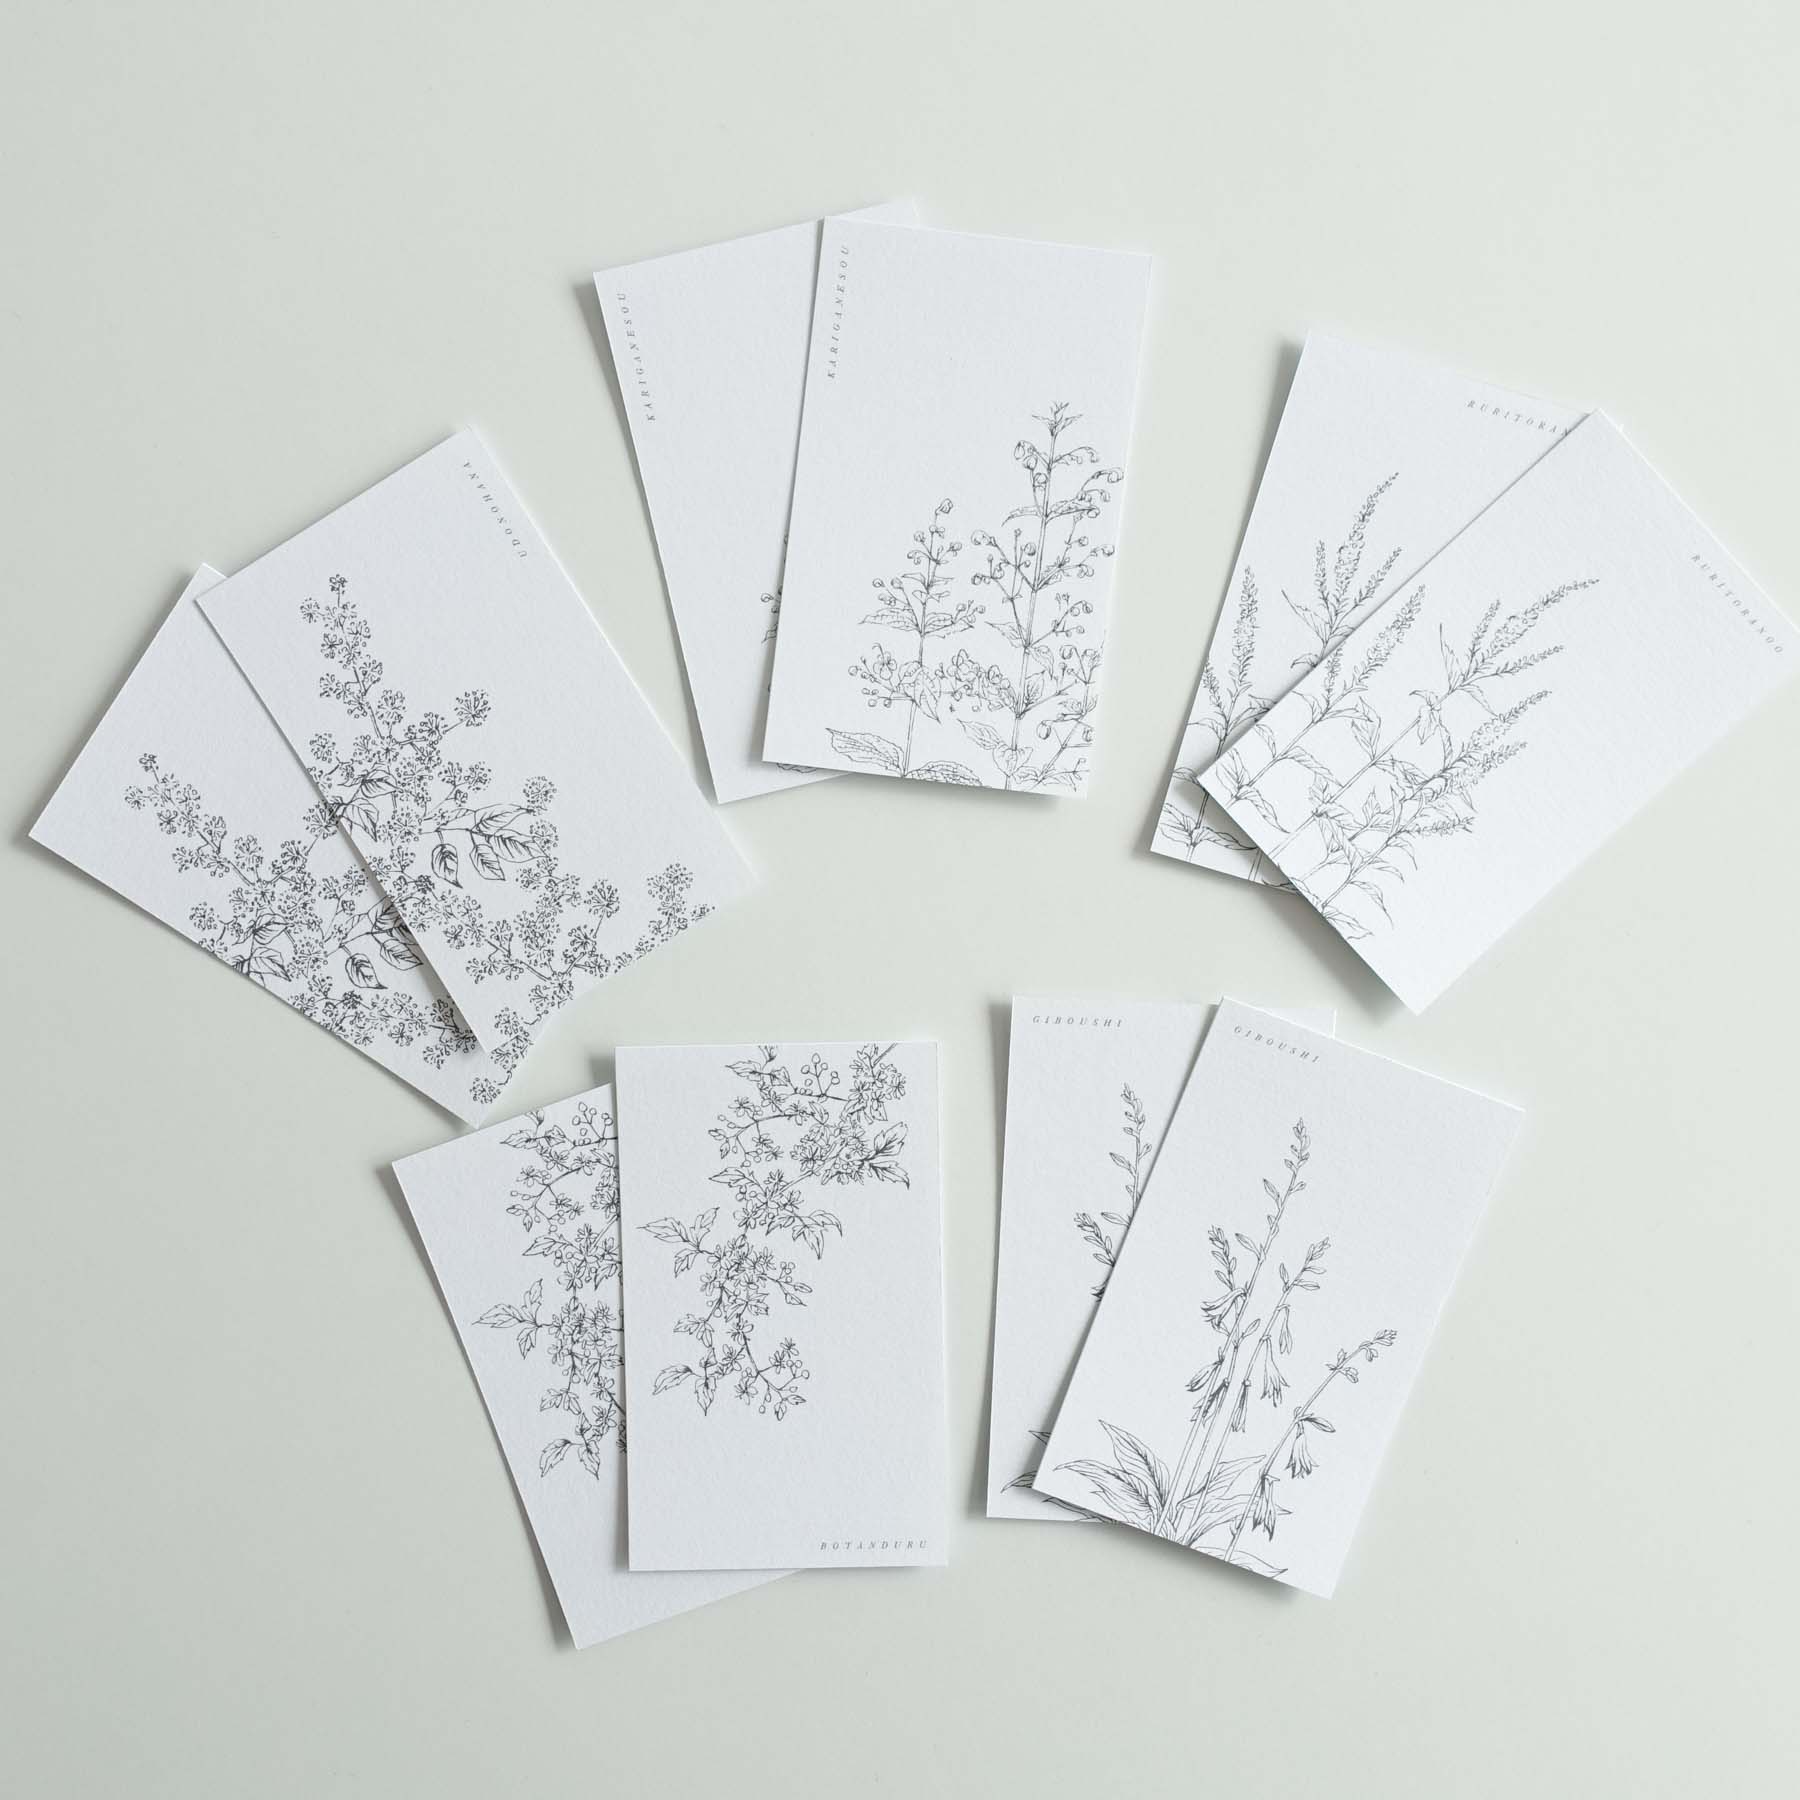 Premade business cards with floral flower drawings